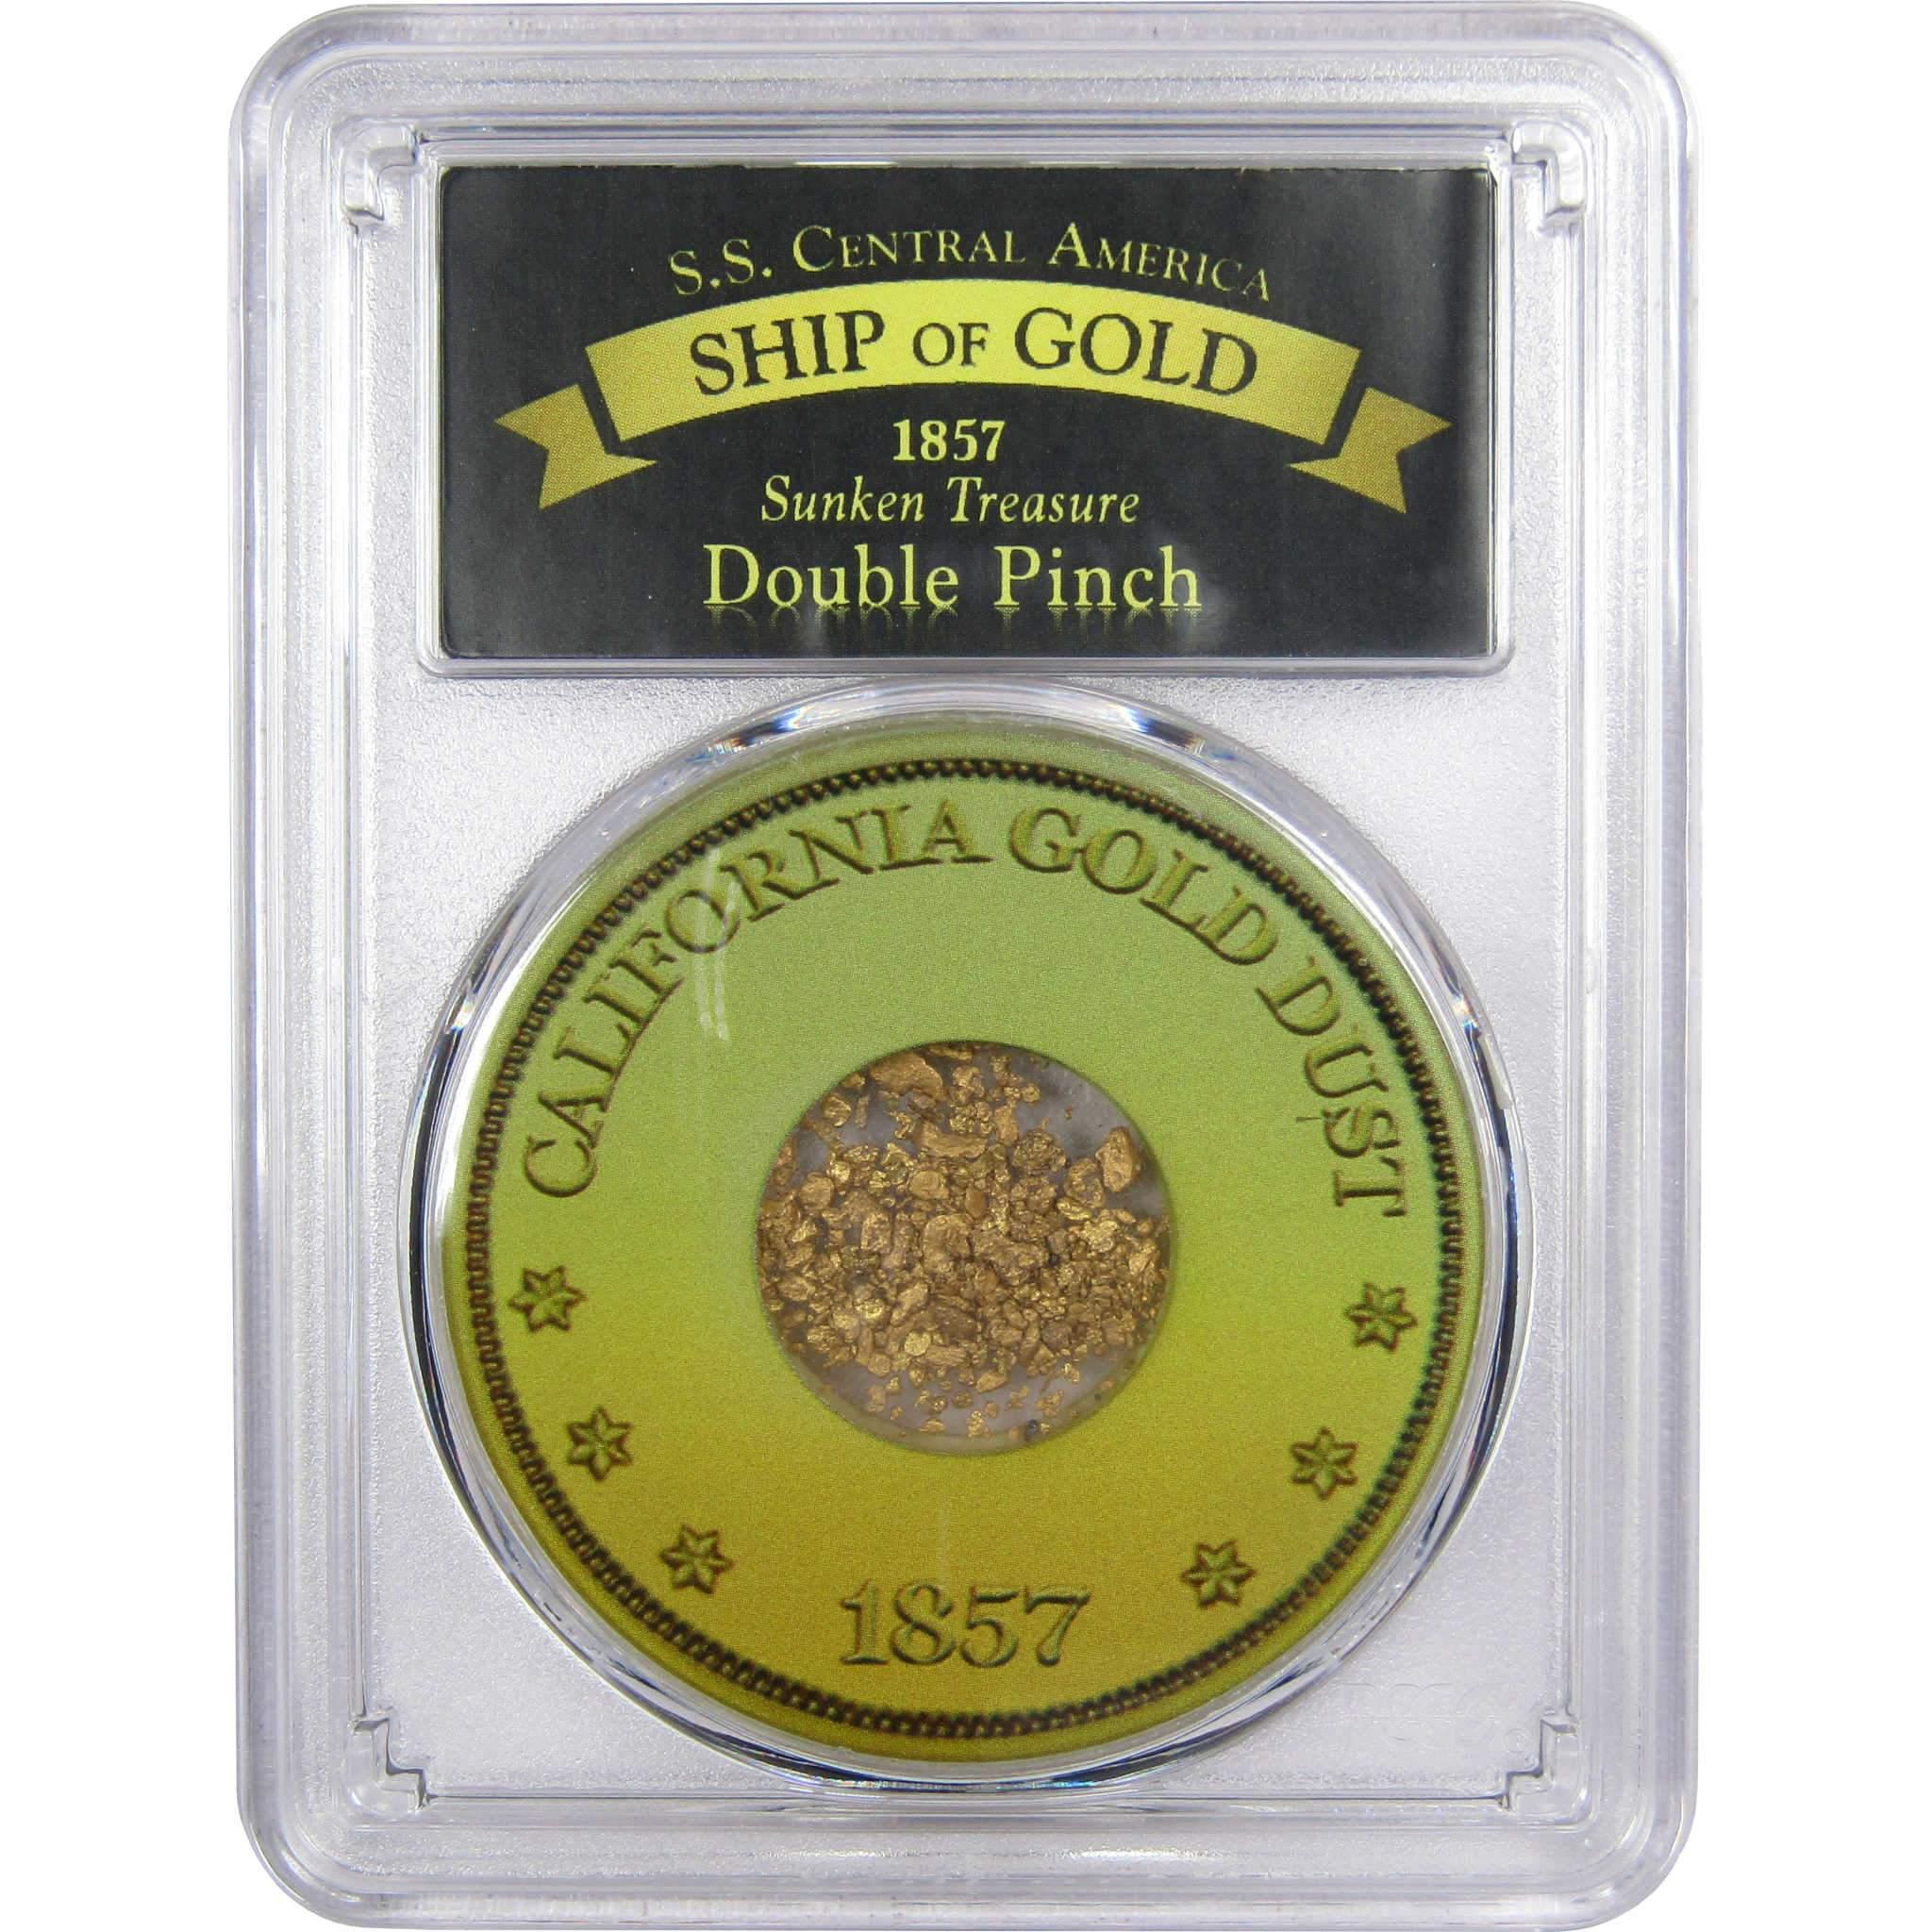 Double Pinch California Gold Dust Gold S.S. Central America Ship of Gold 1857